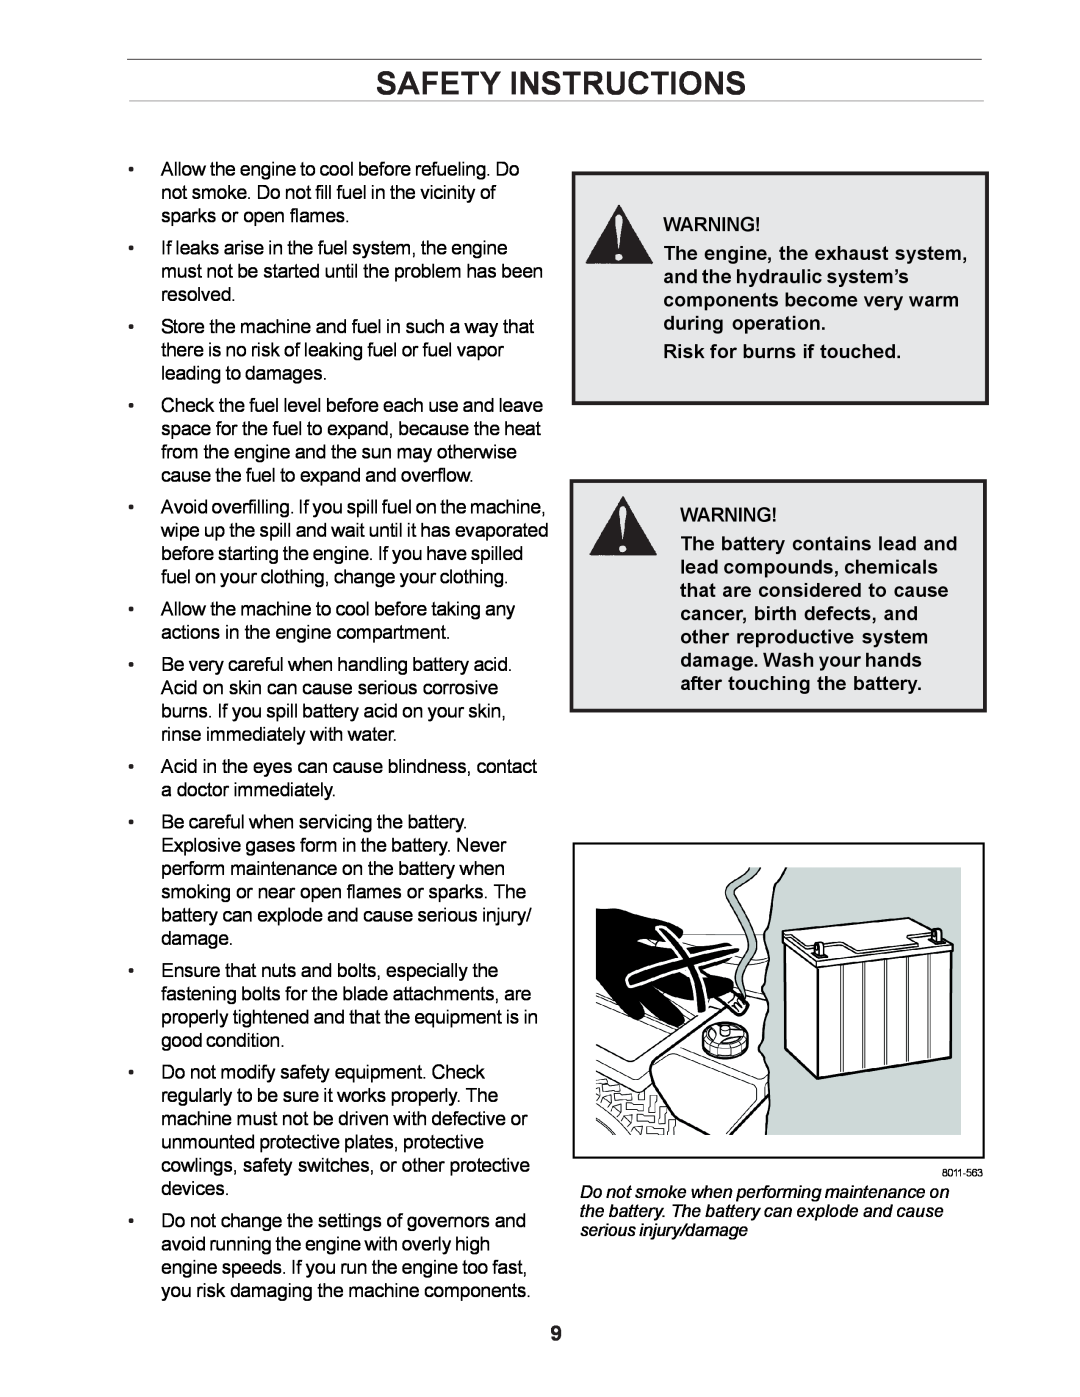 Yazoo/Kees ZCBI48181 manual Risk for burns if touched, Safety Instructions 